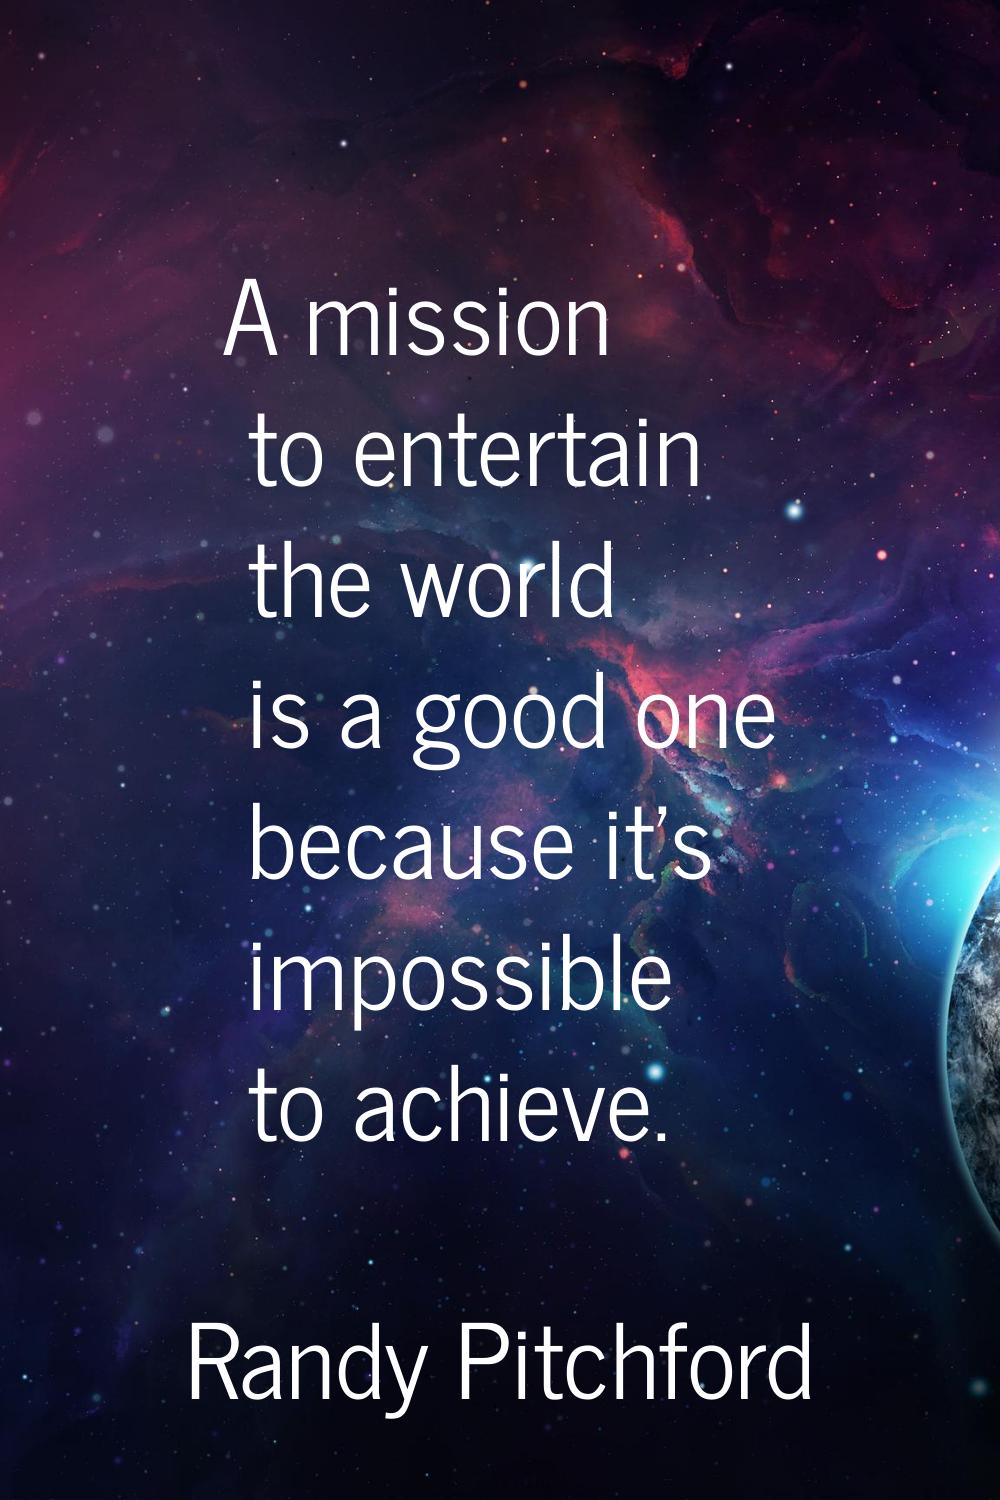 A mission to entertain the world is a good one because it's impossible to achieve.